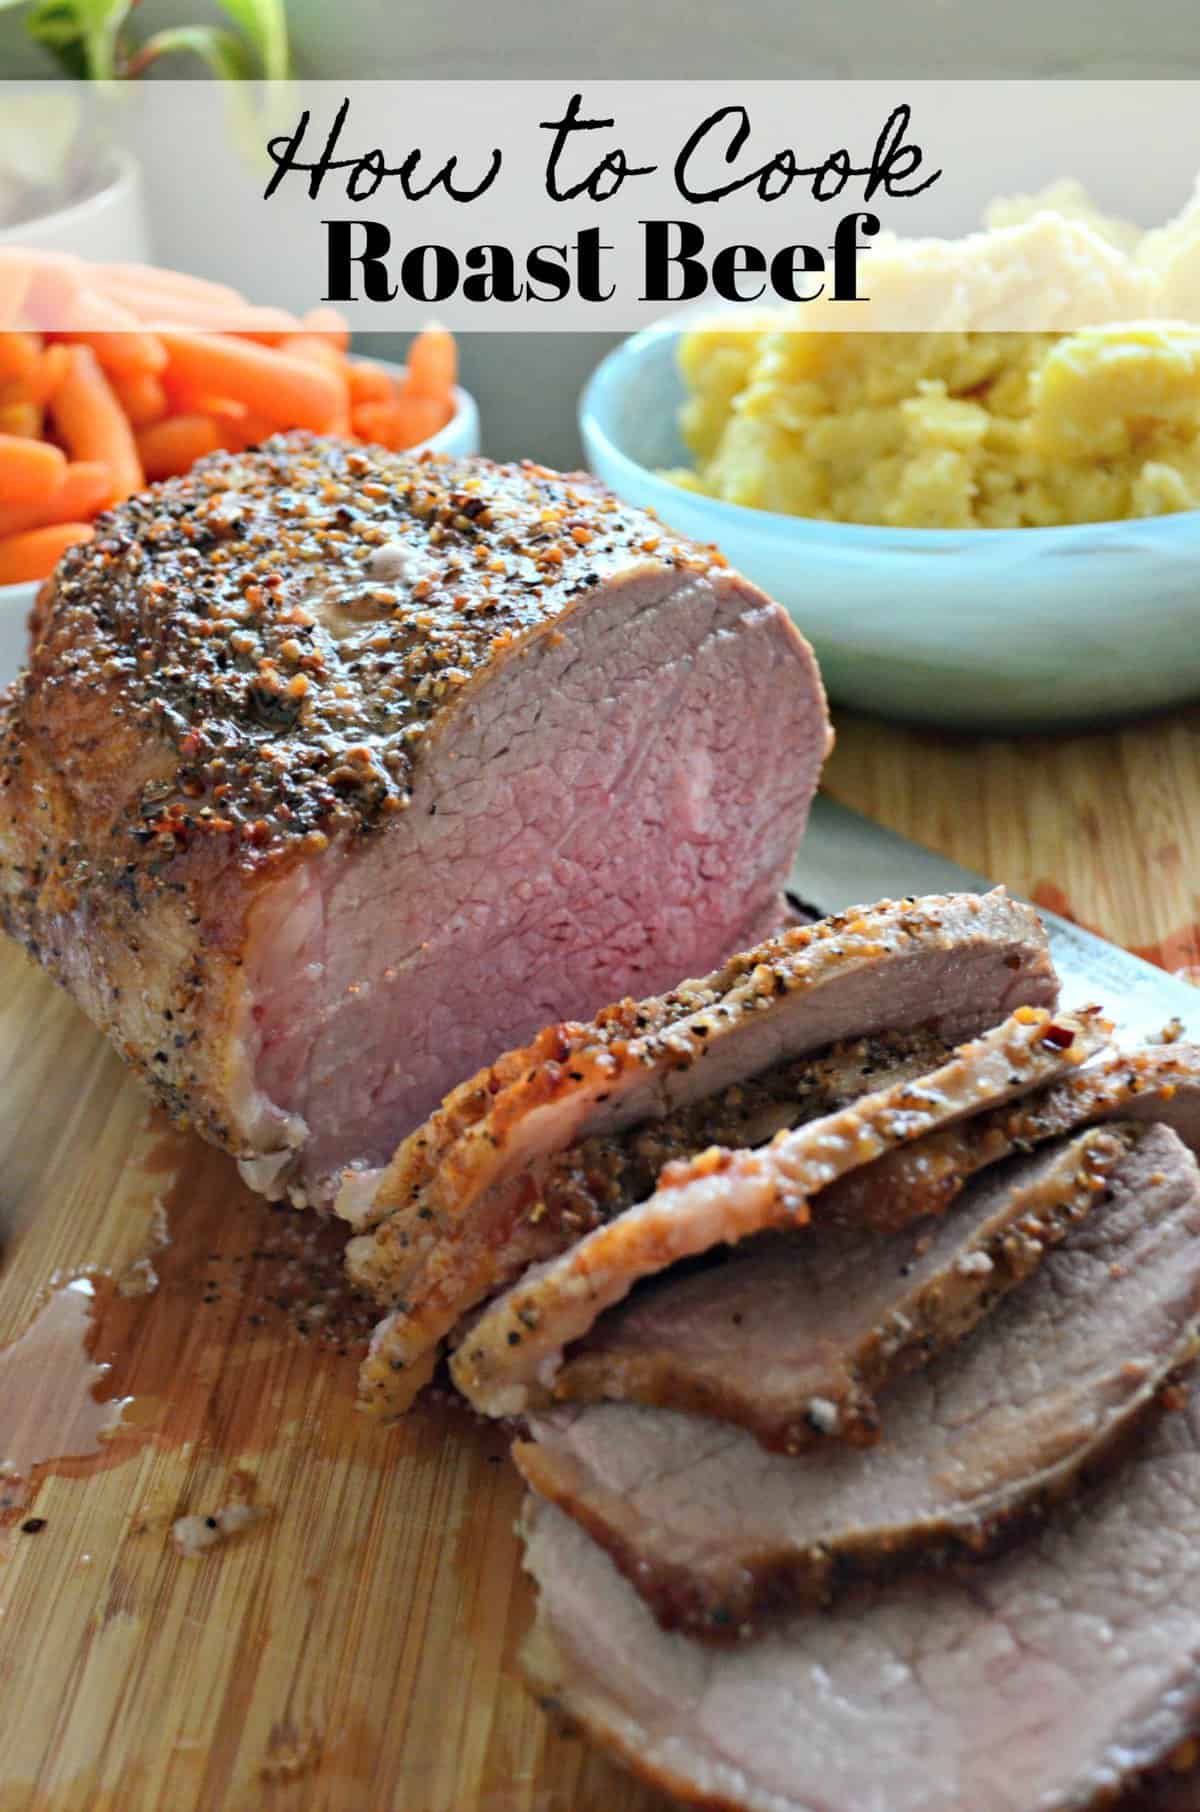 sliced roast beef crusted with spices on cutting board in front of carrots and mashed potatoes with title text.